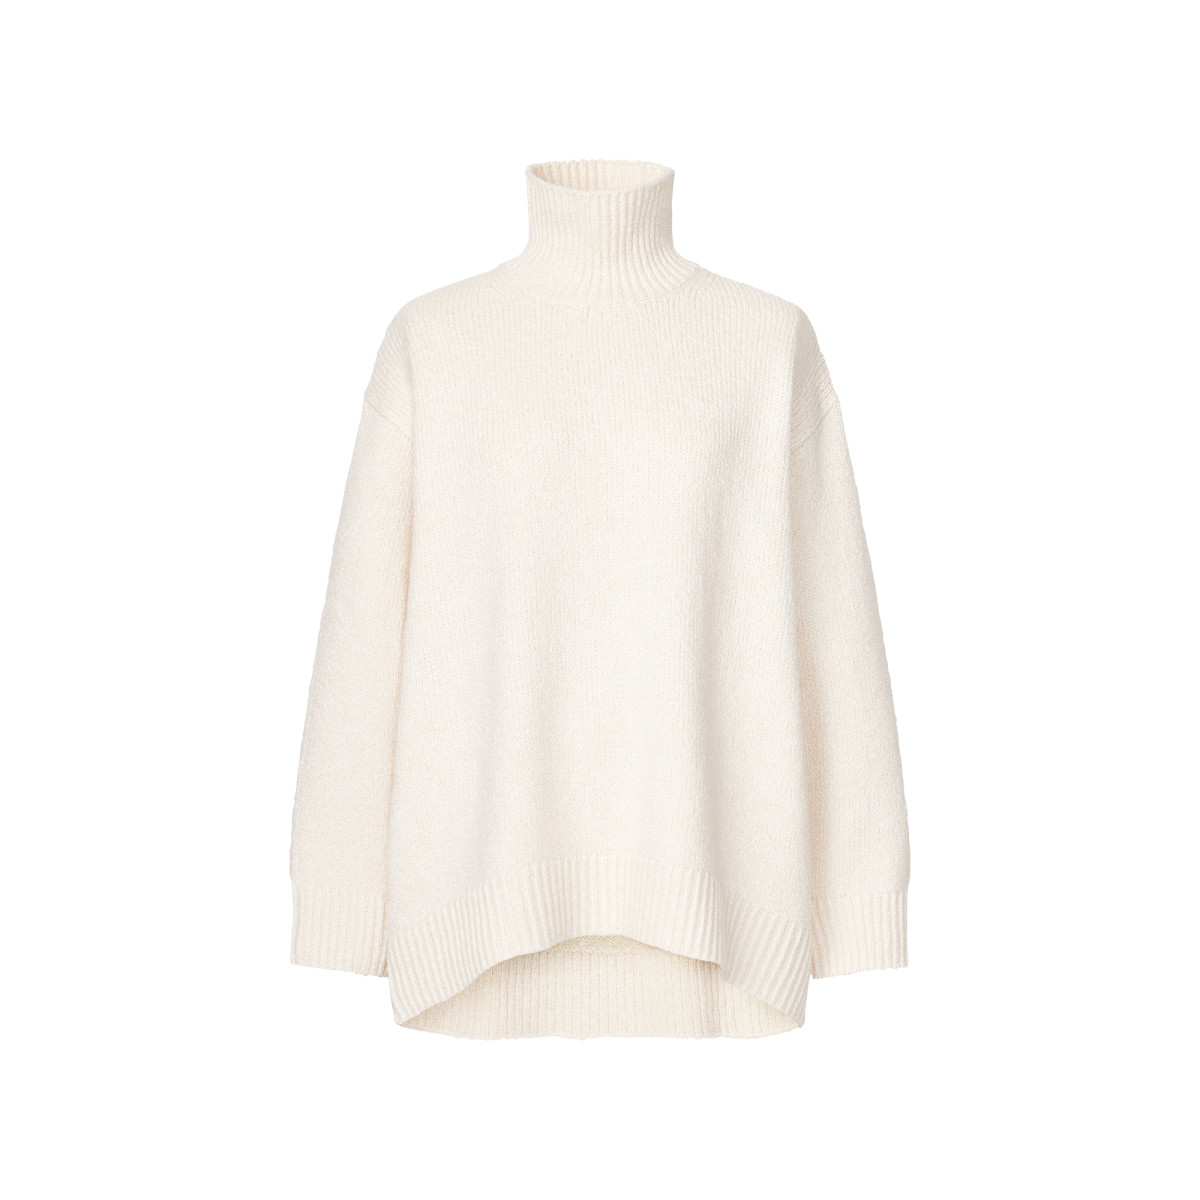 See and Shop Every Single Look From Clare Waight Keller's New Brand for ...